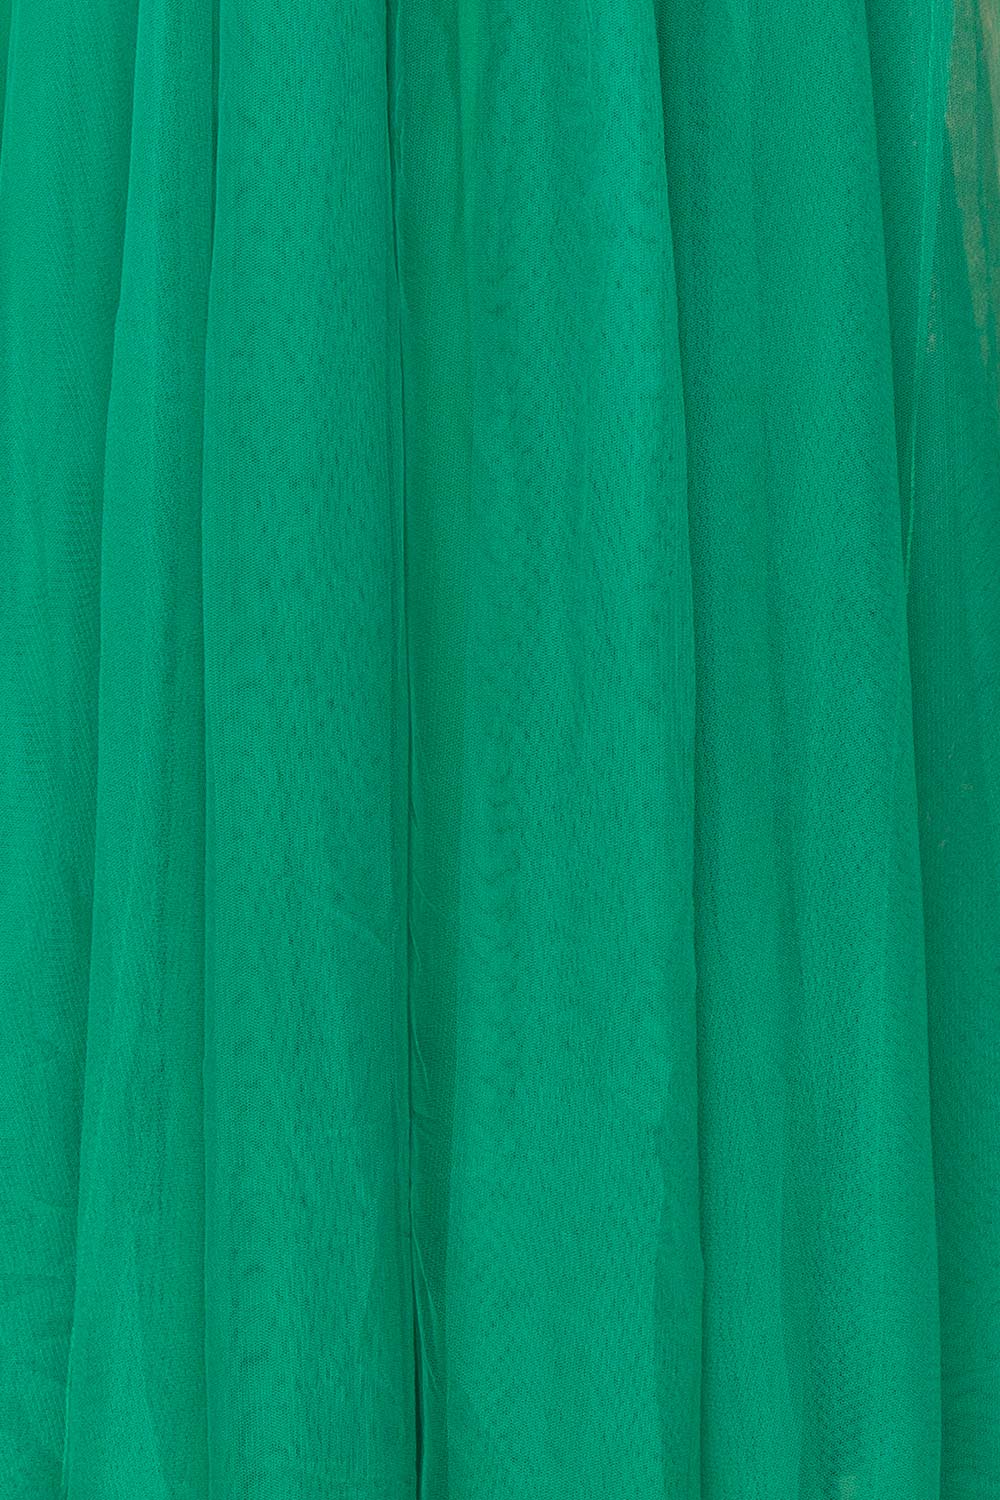 Aliki Light Green Plunging Neck Tulle Maxi Dress | Boutique 1861 fabric